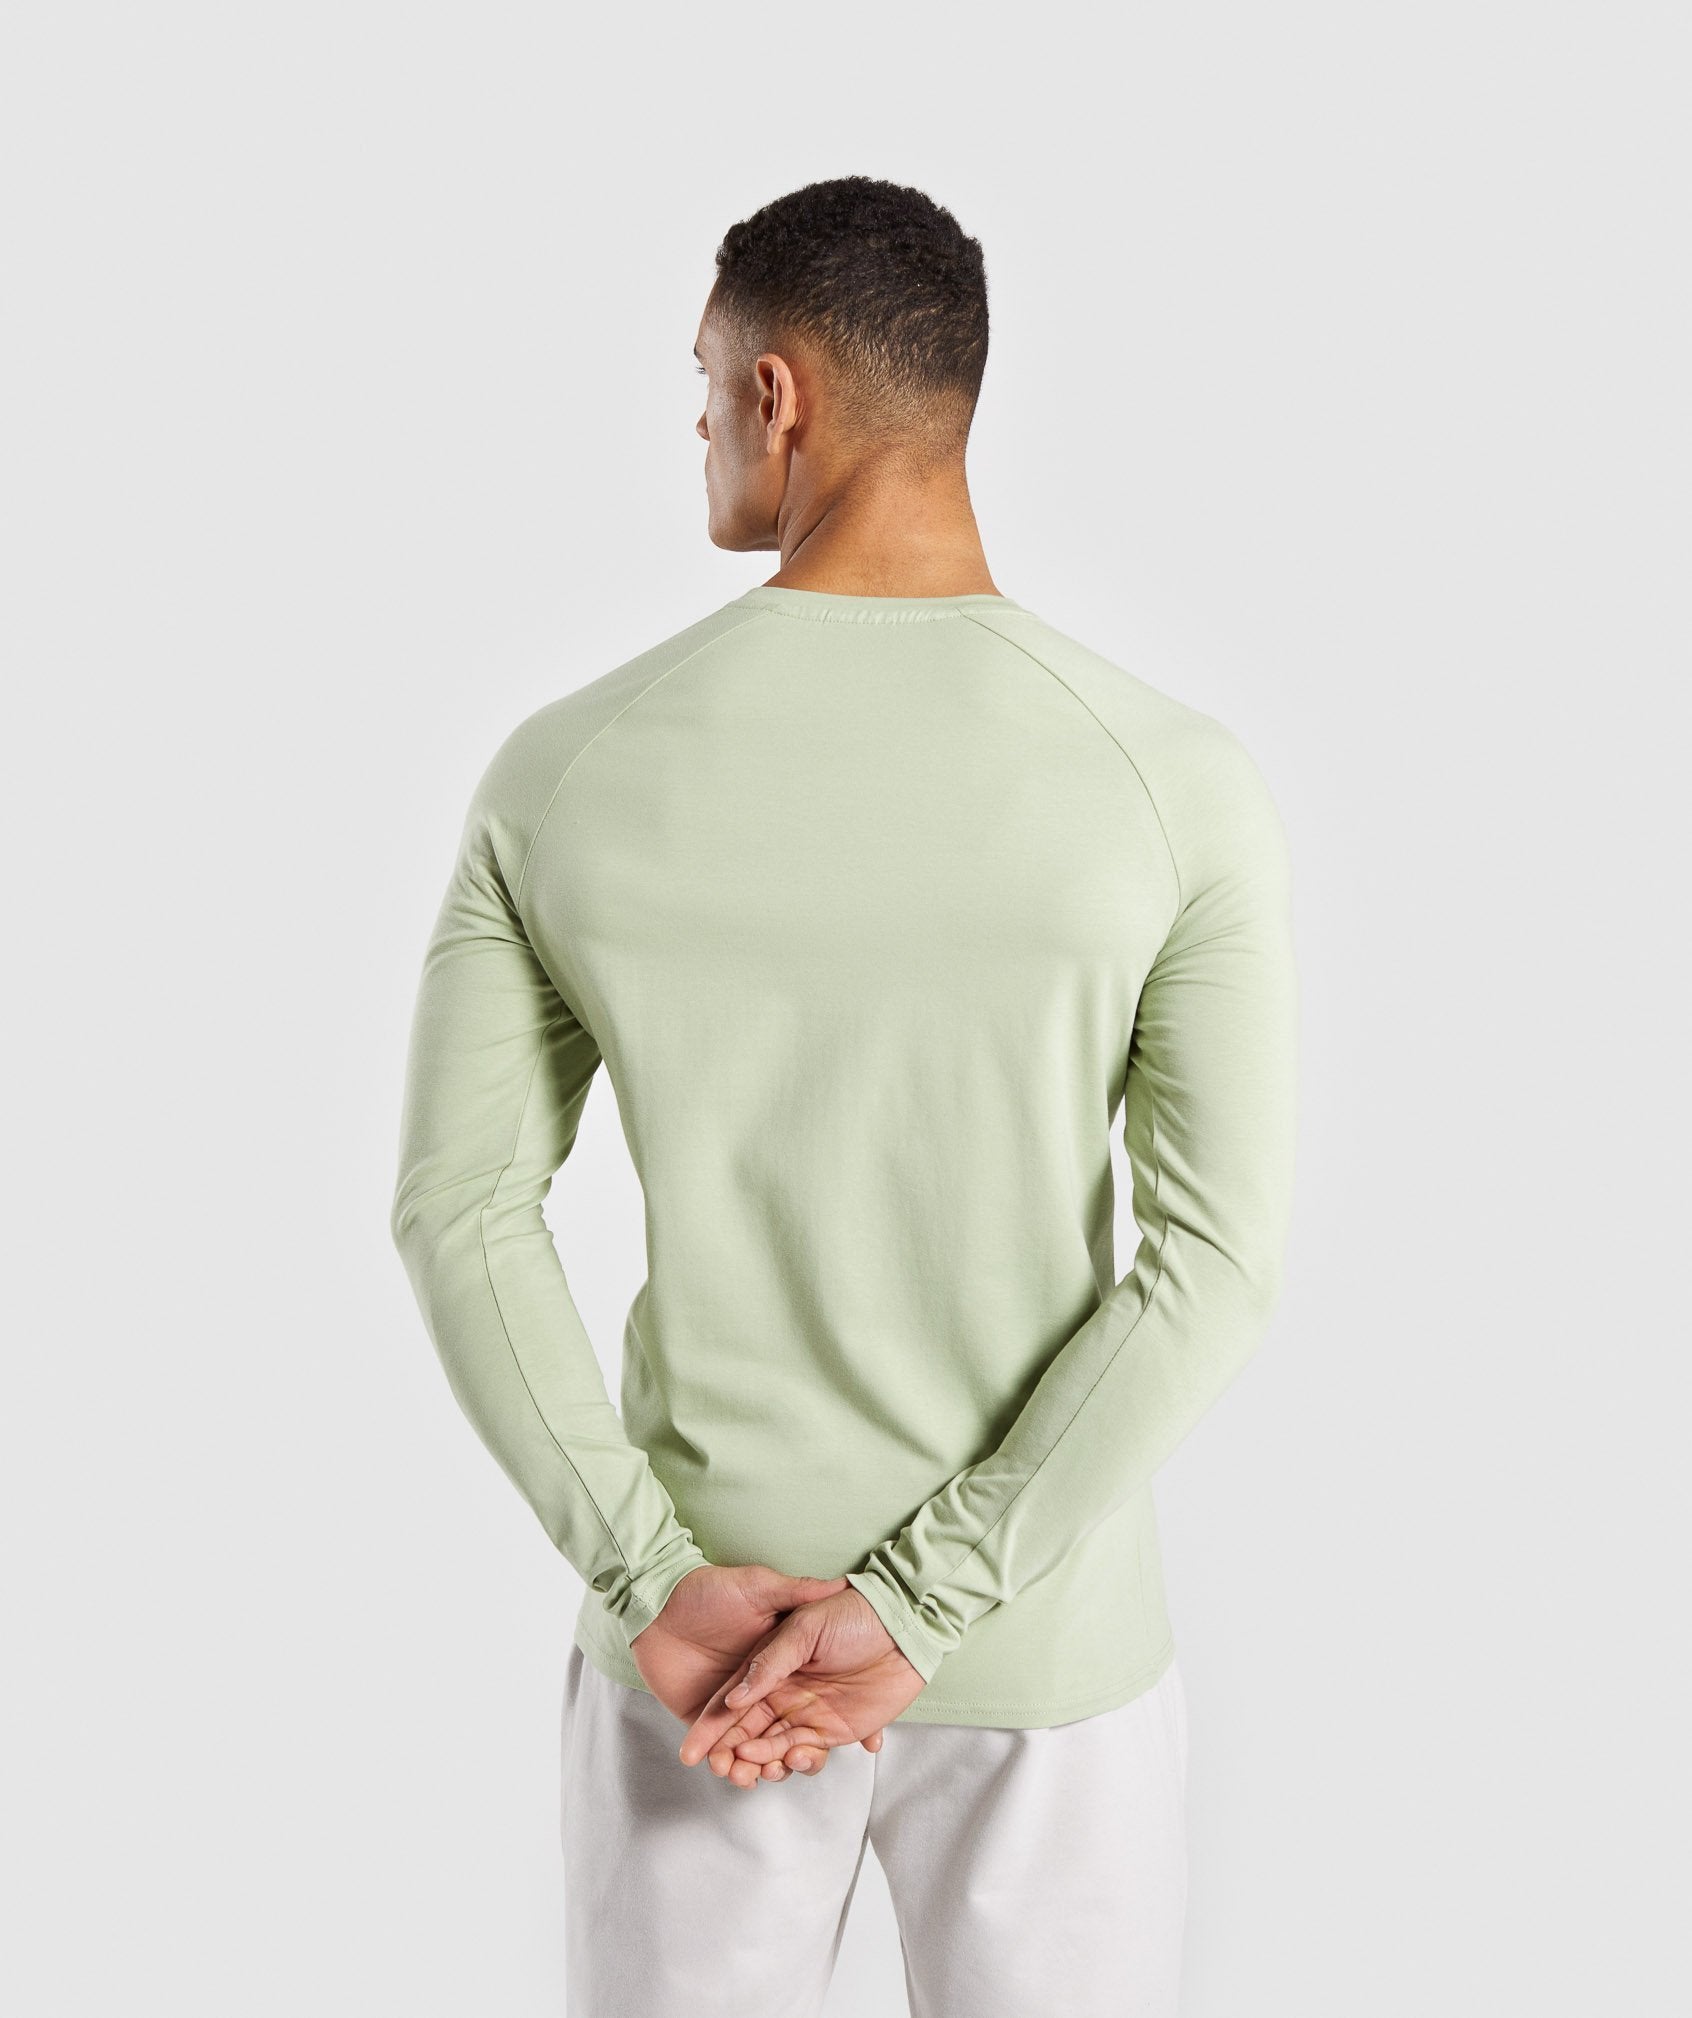 Apollo Long Sleeve T-Shirt in Green - view 2